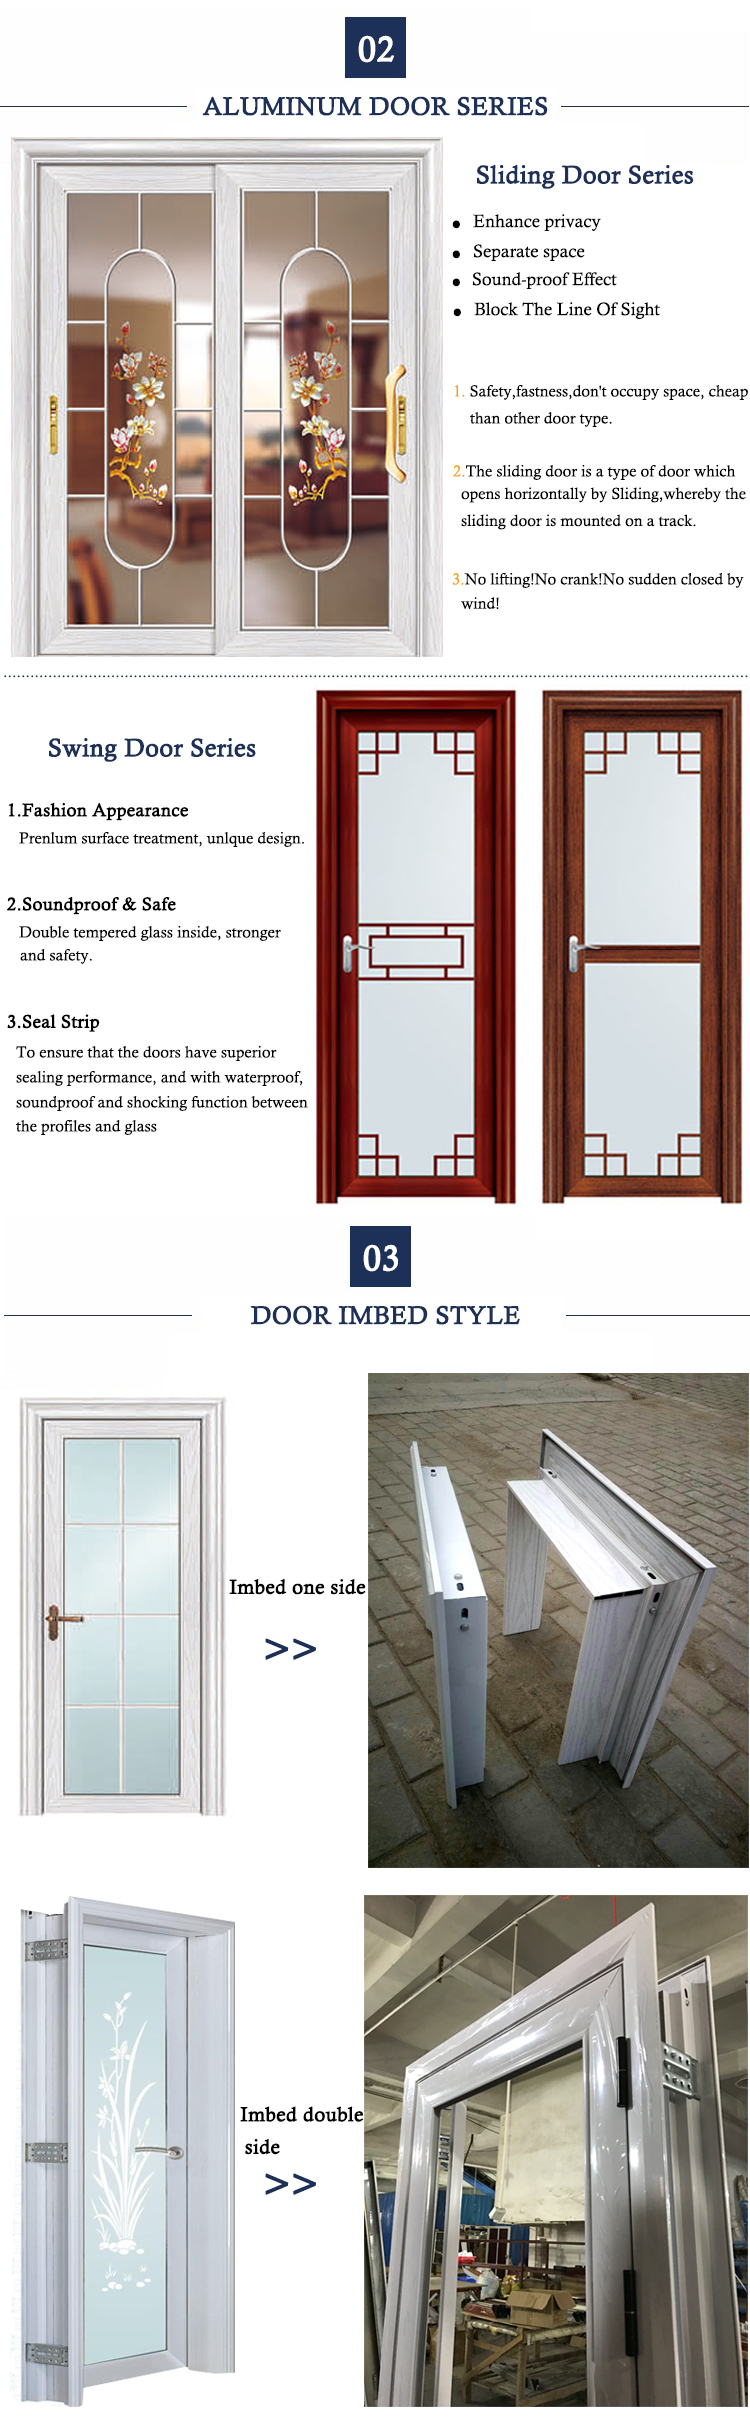 double aluminum framed french doors exterior